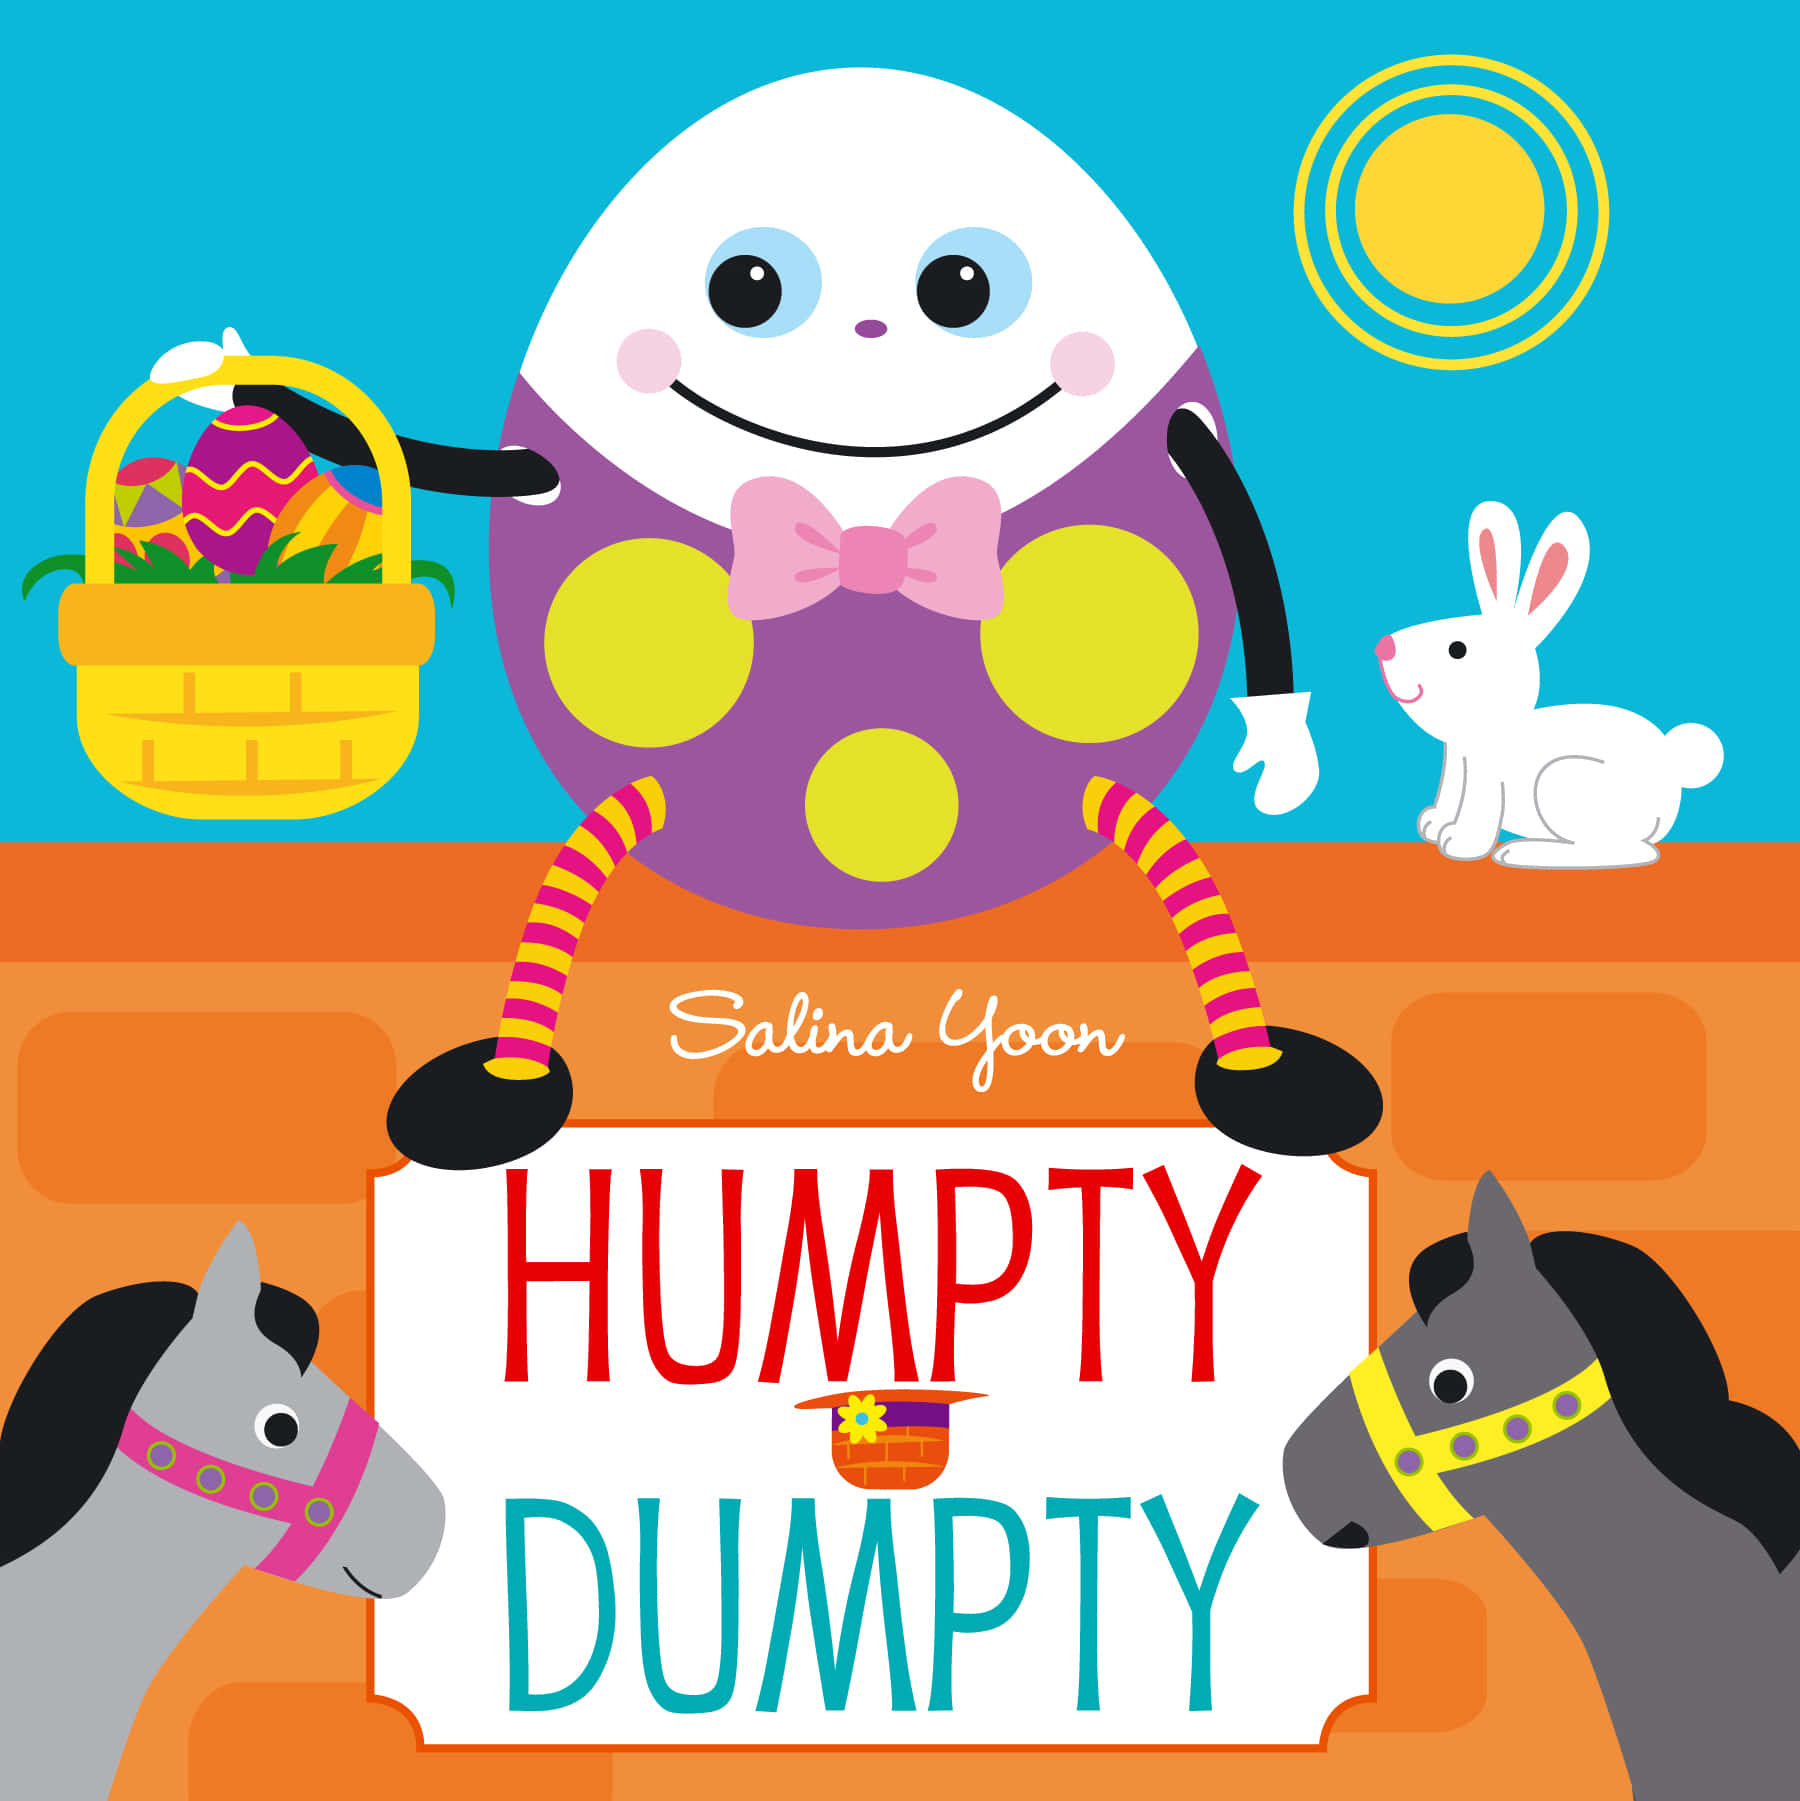 A unique interpretation of the classic nursery rhyme character, Humpty Dumpty sitting on a wall.